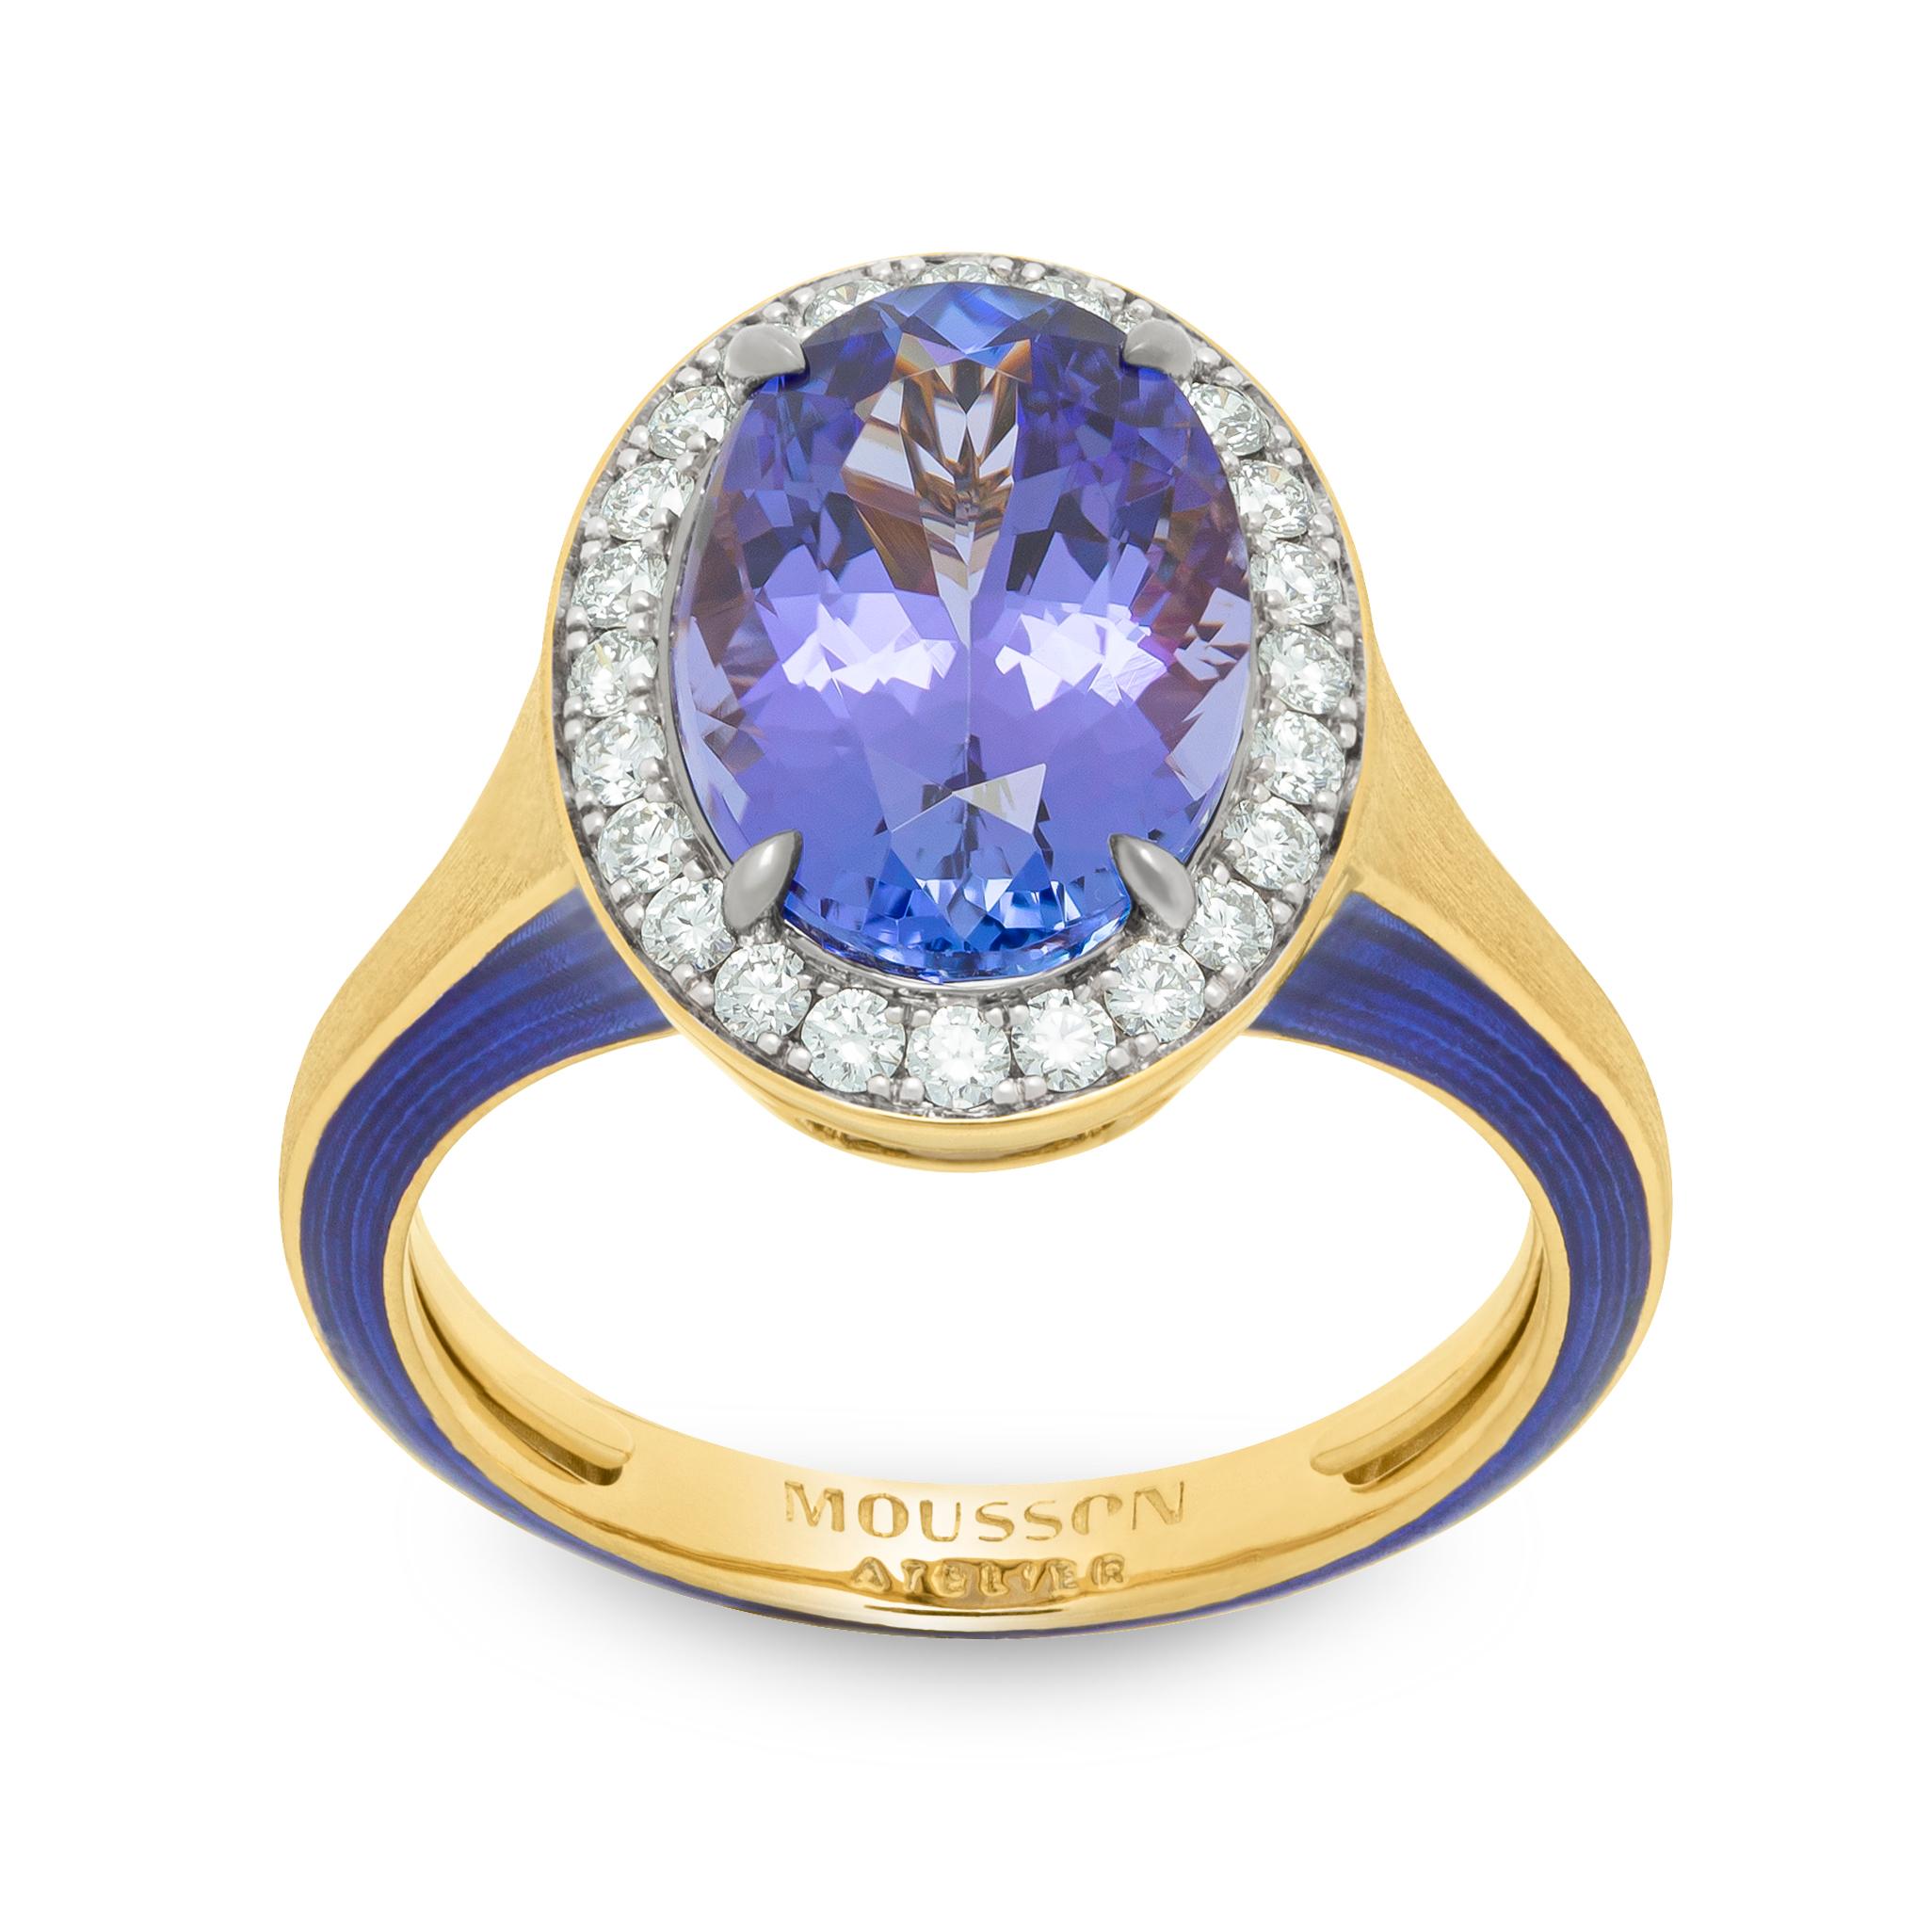 Tanzanite 4.91 Carat Diamonds 18 Karat Yellow White Gold Enamel New Classic Ring
We have published a series of New Classic Rings with the same idea but with different details. Introducing a Ring crafted from 18 Karat Yellow Gold, which creates a